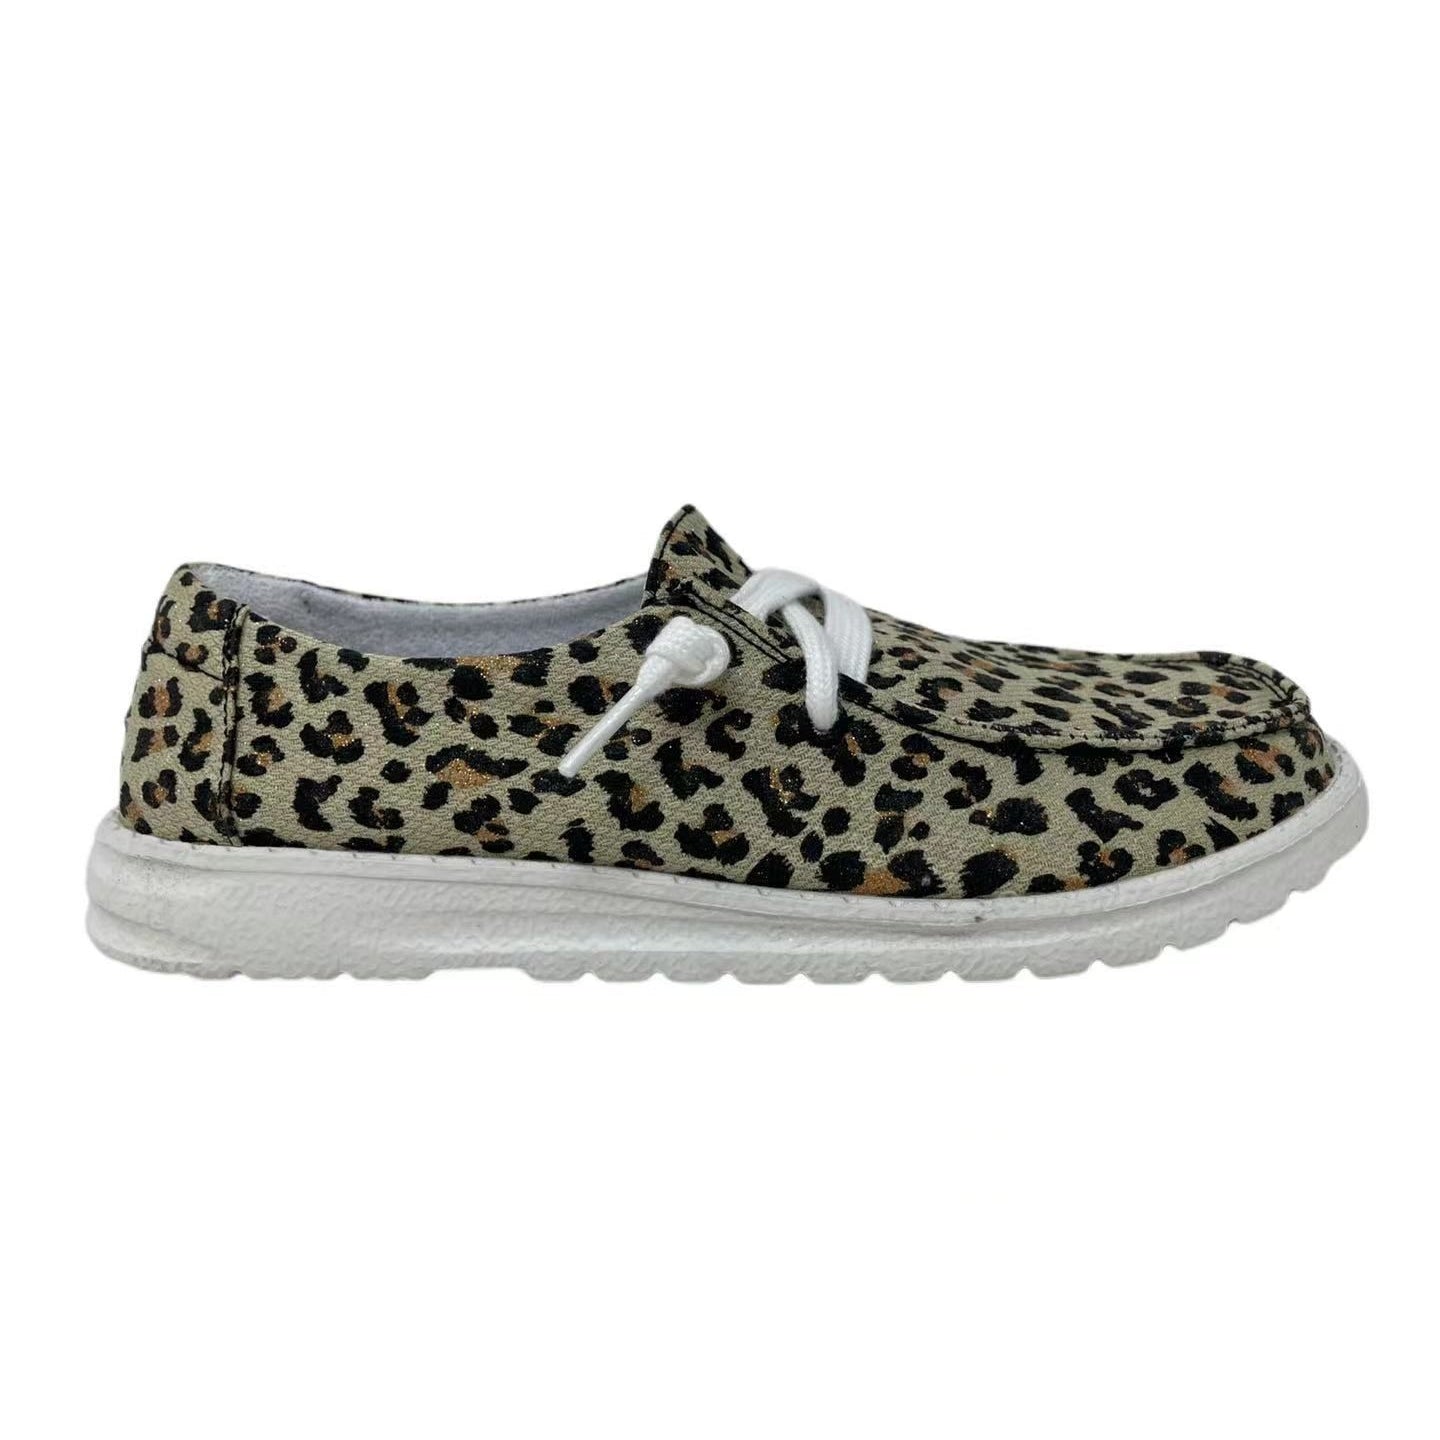 New Gypsy Jazz Gia Slip On Canvas Sneaker - Taupe Leopard